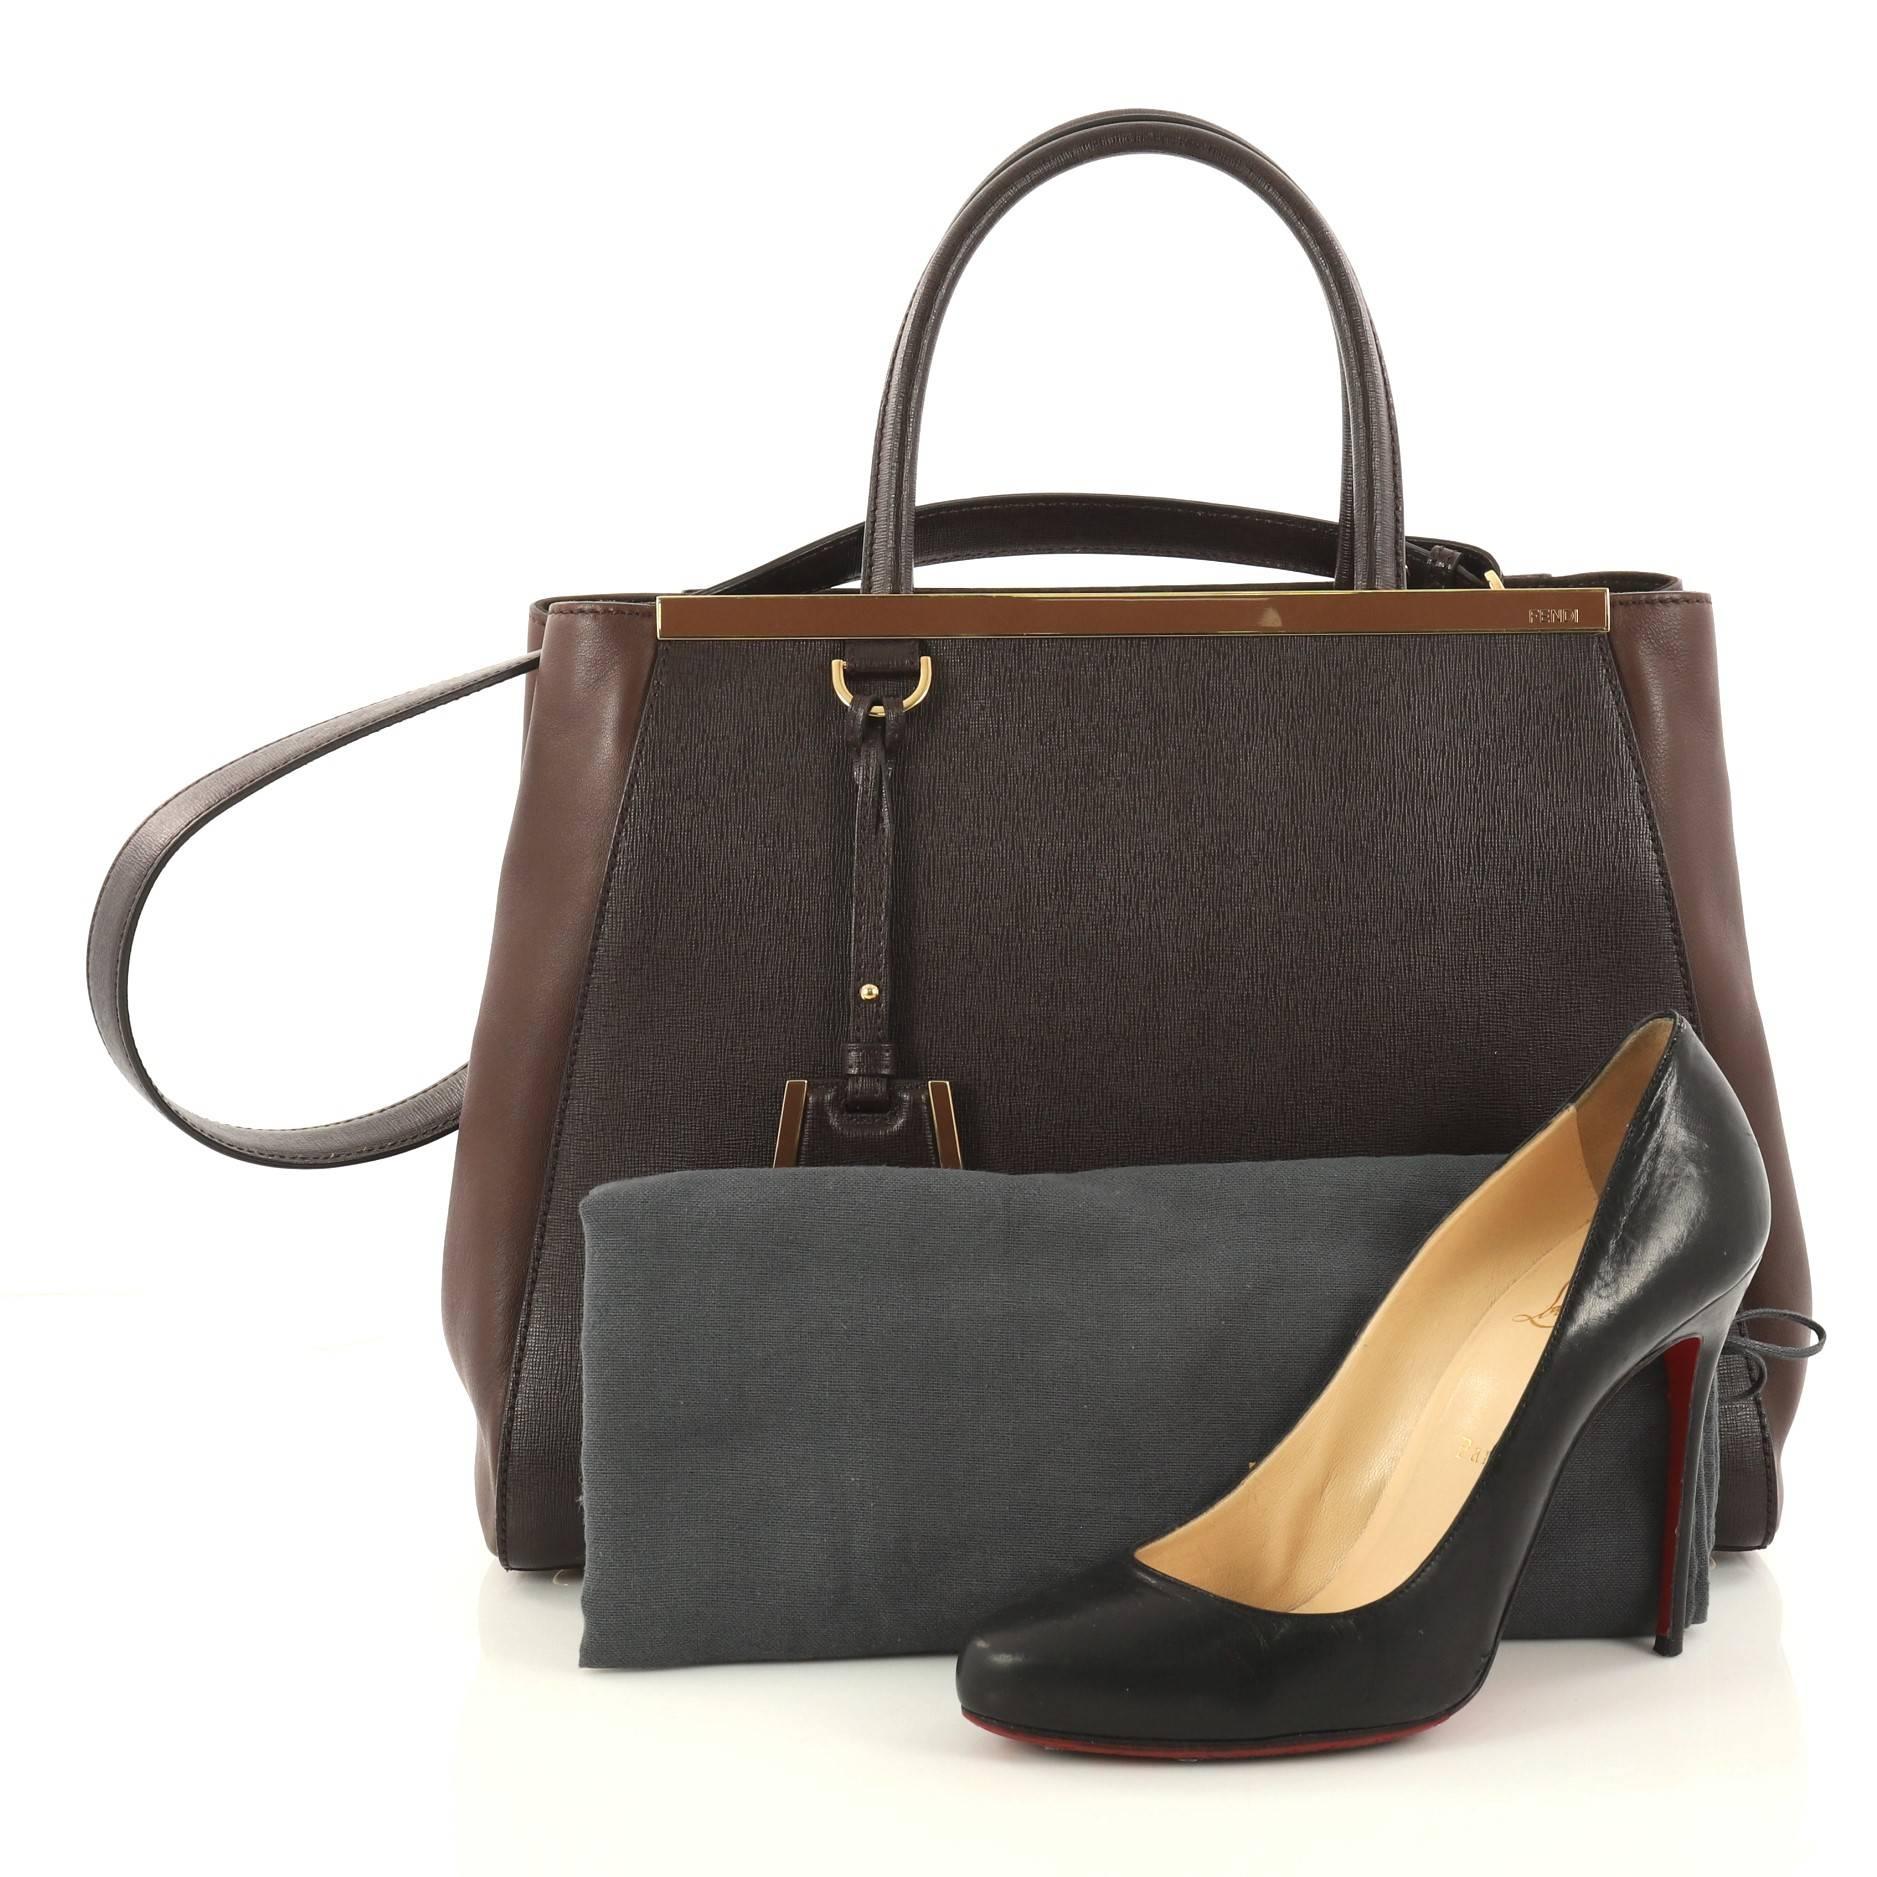 This authentic Fendi 2Jours Handbag Leather Medium is impeccably stylish with a simple silhouette and structured design. Finely crafted in sturdy brown leather with soft calfskin sides, this popular tote features a shining top bar, protective base